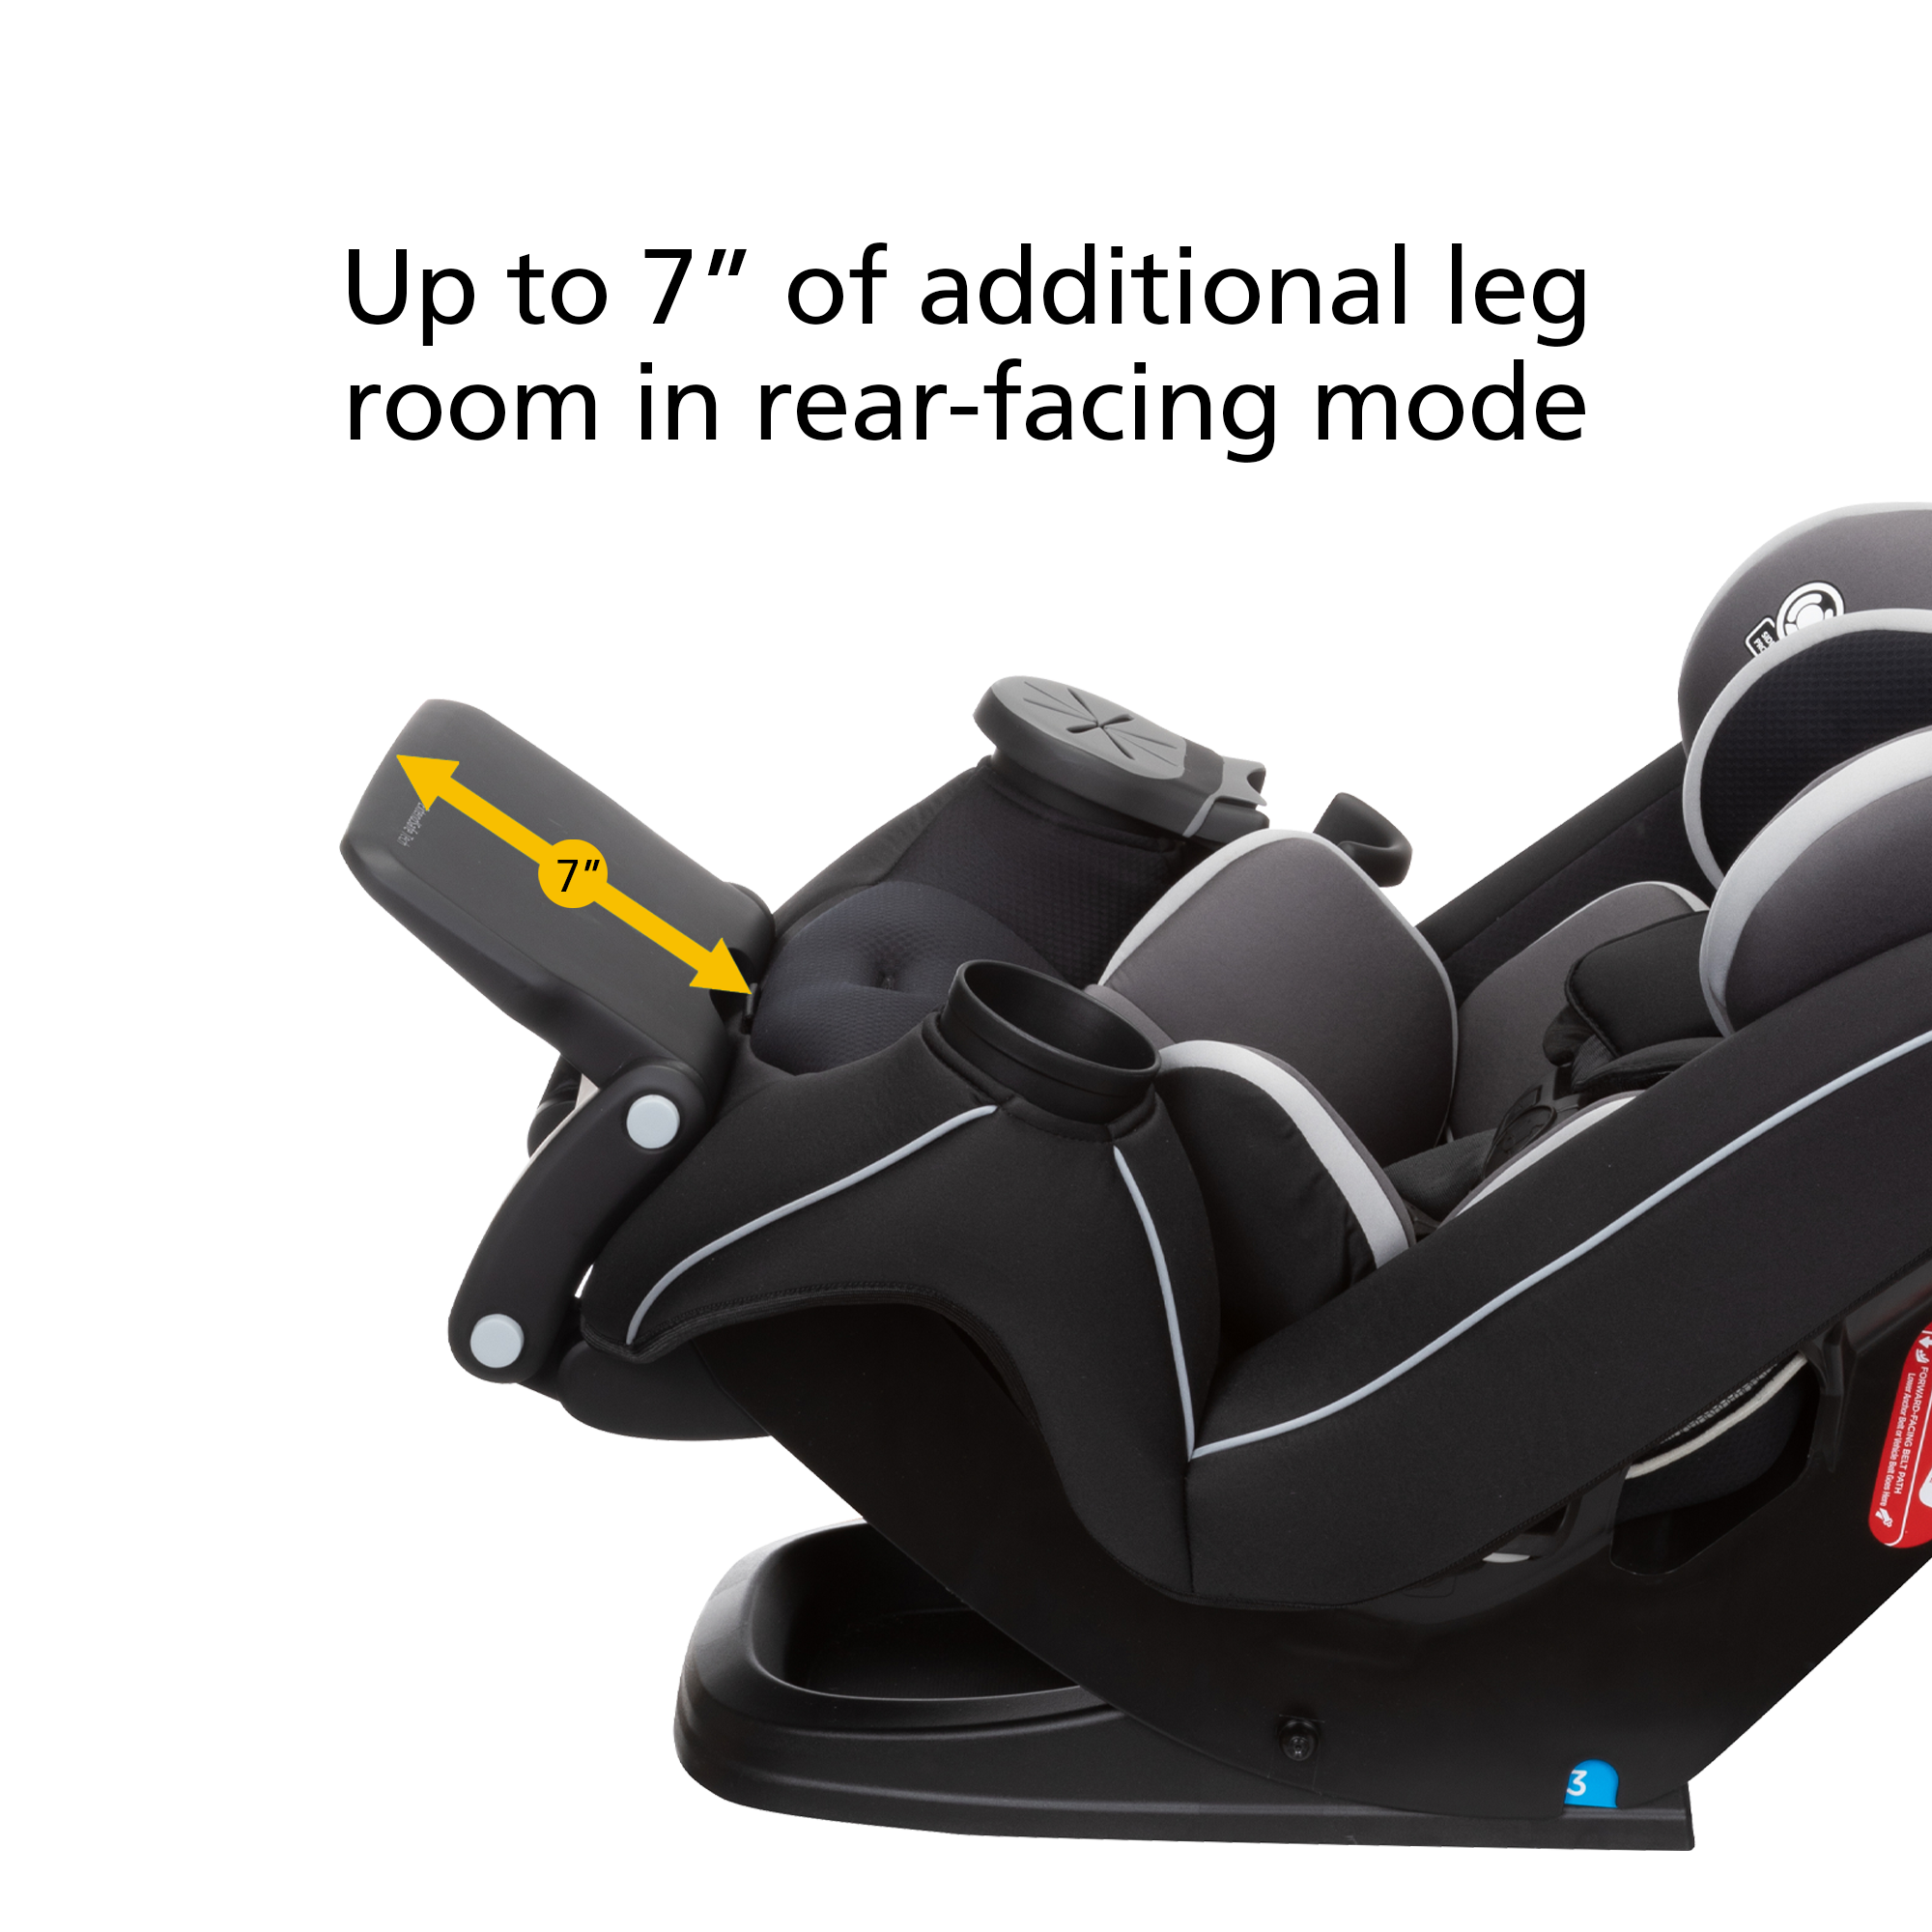 Grow and Go™ Extend 'n Ride LX - Up to 7" of additional leg room in rear-facing mode